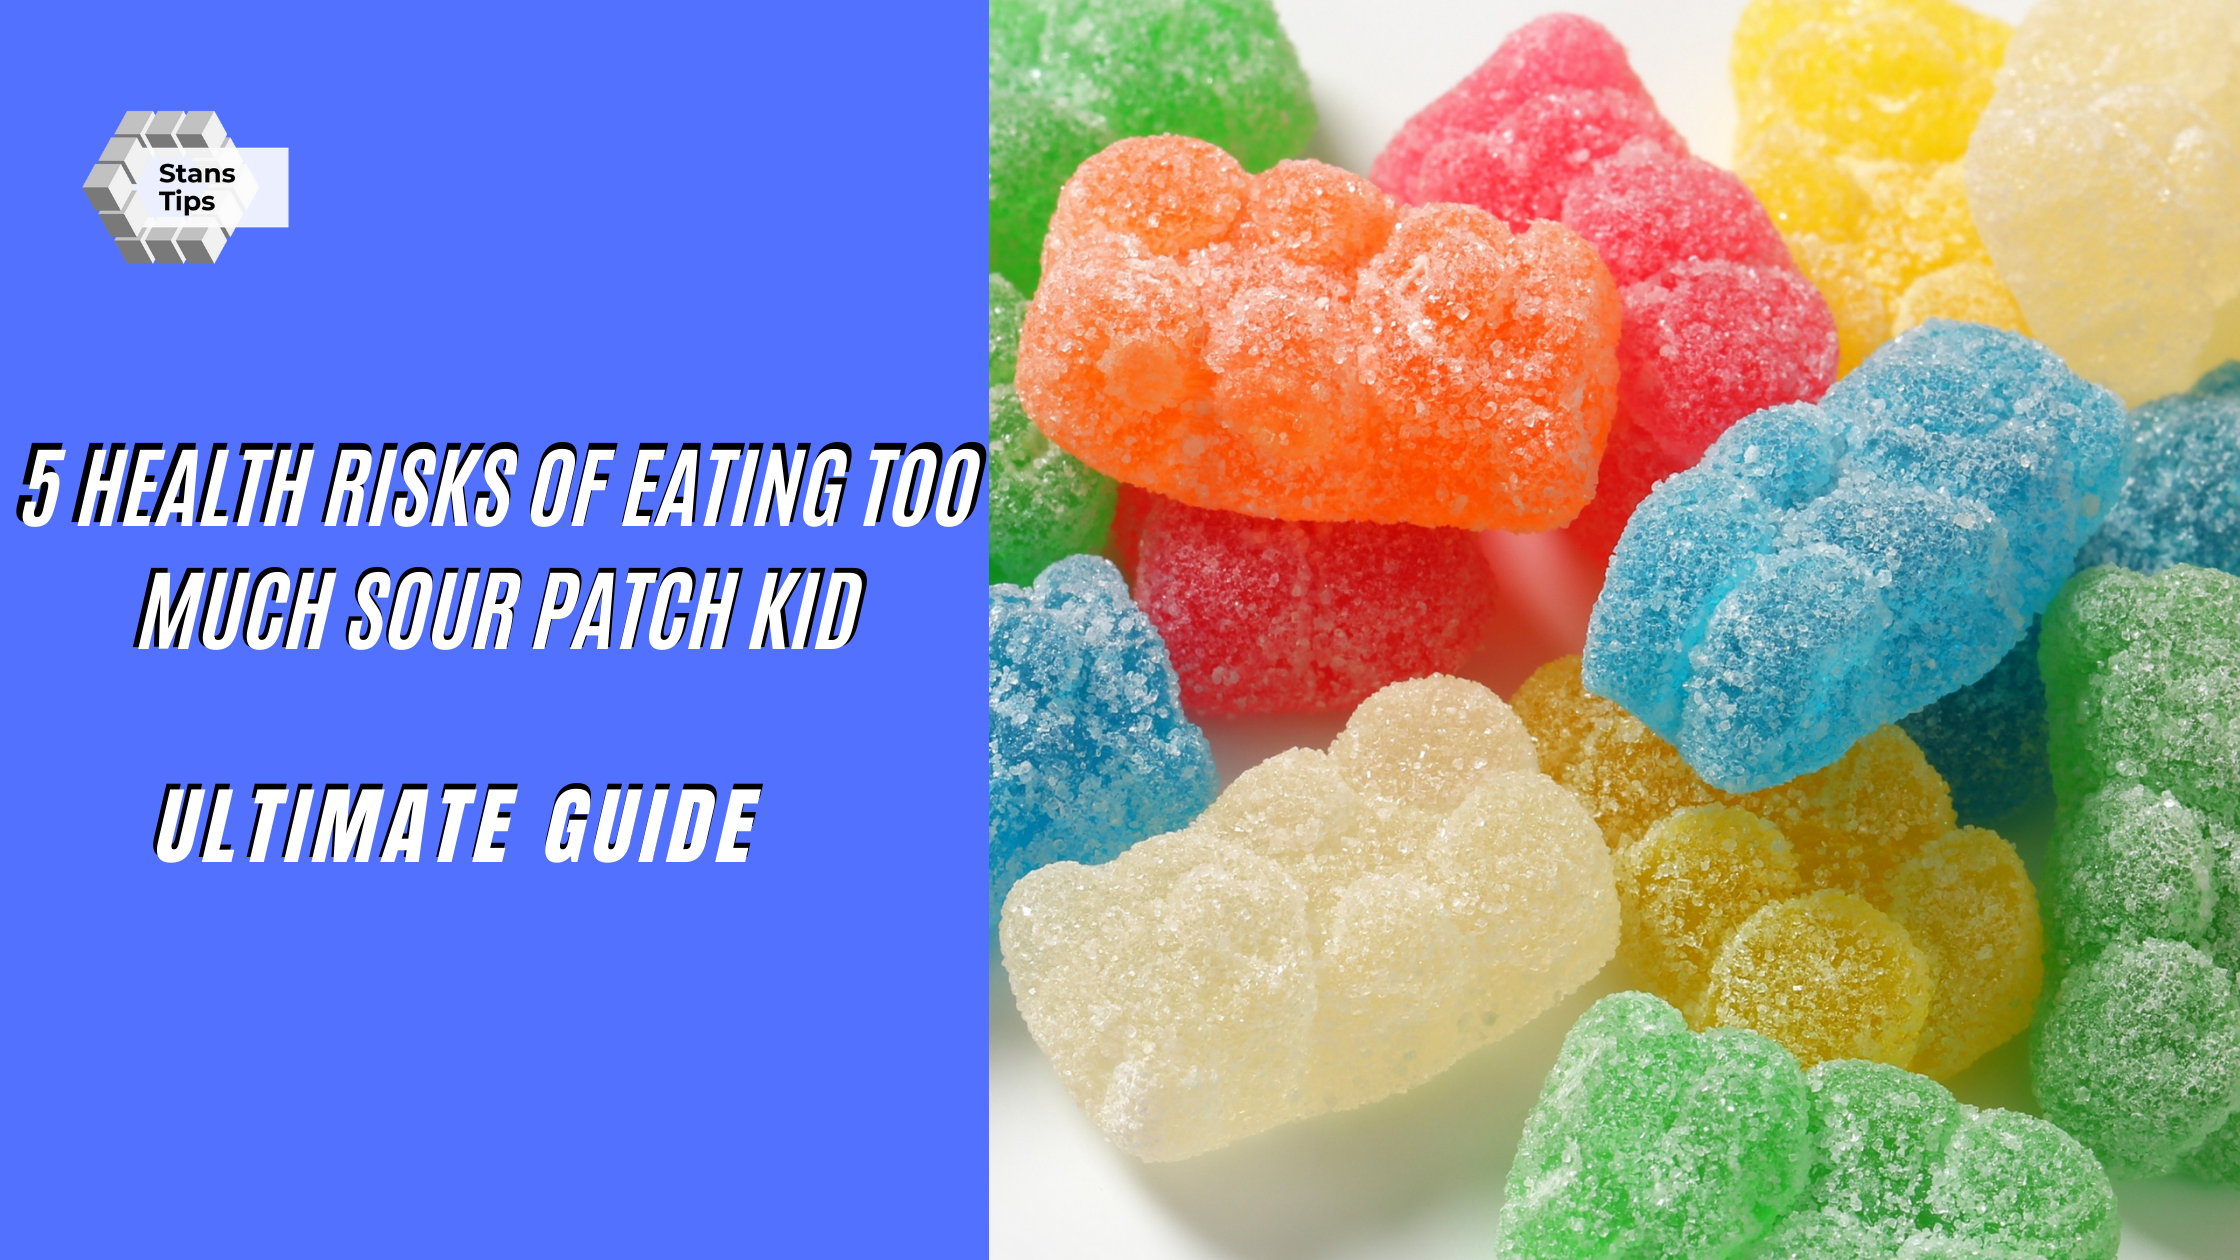 5 Health risks of eating too much sour patch kid